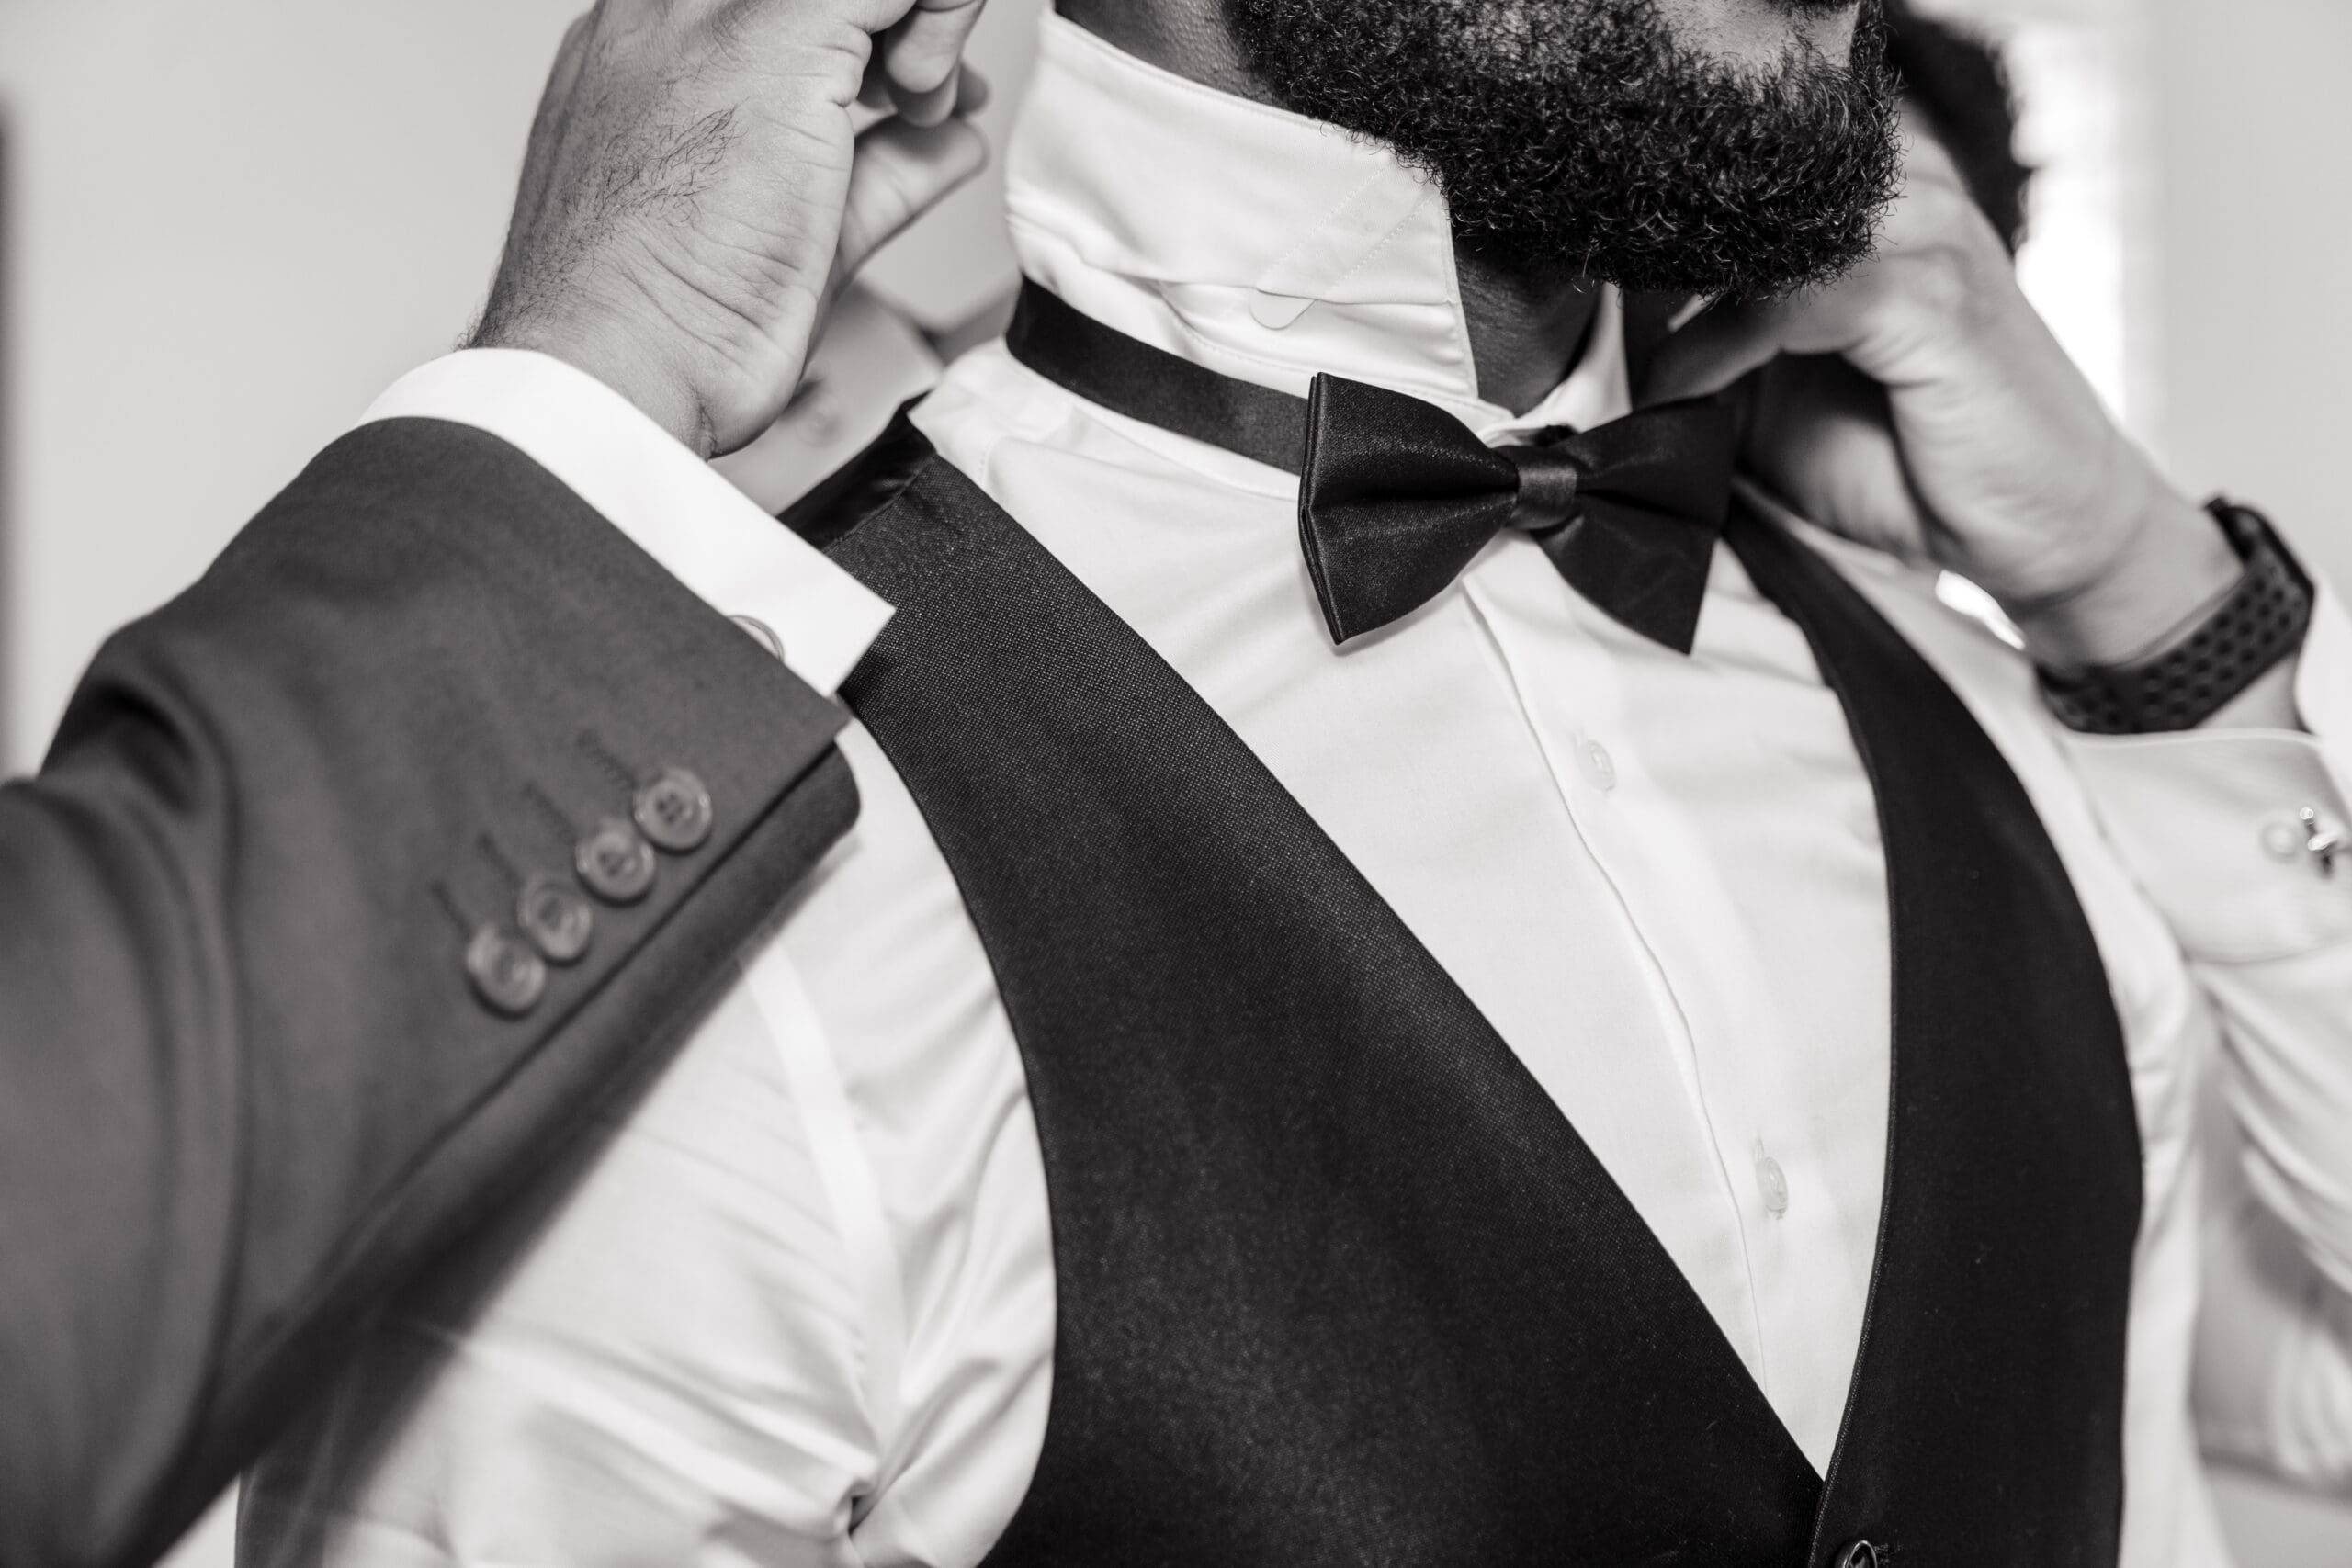 Black and White: Close-up shot of a groomsman helping the groom fix his tie and collar before the wedding.